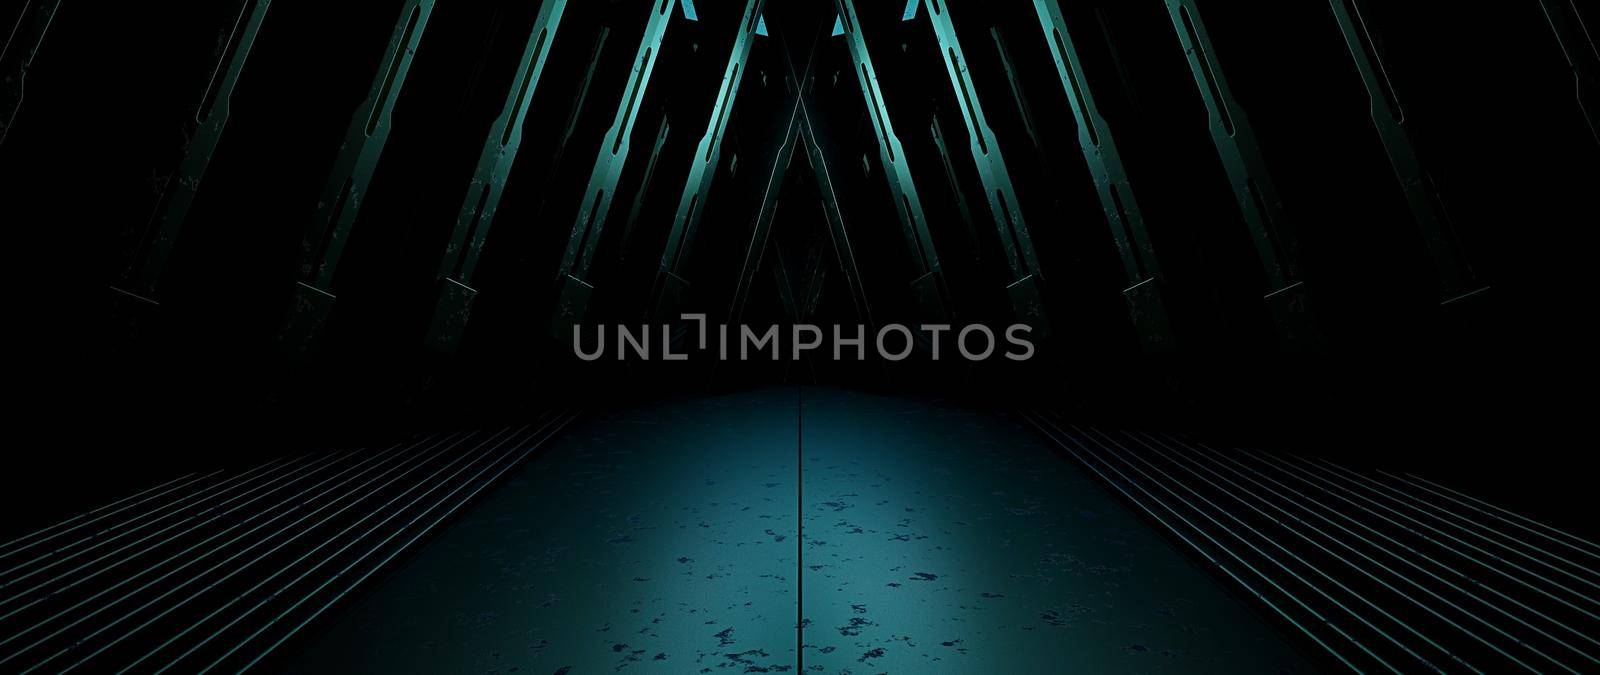 Futuristic Industrial Metallic Reflective Studio Room Lighted Blue Turquoise Banner Background Alien Concept 3D Rendering by yay_lmrb